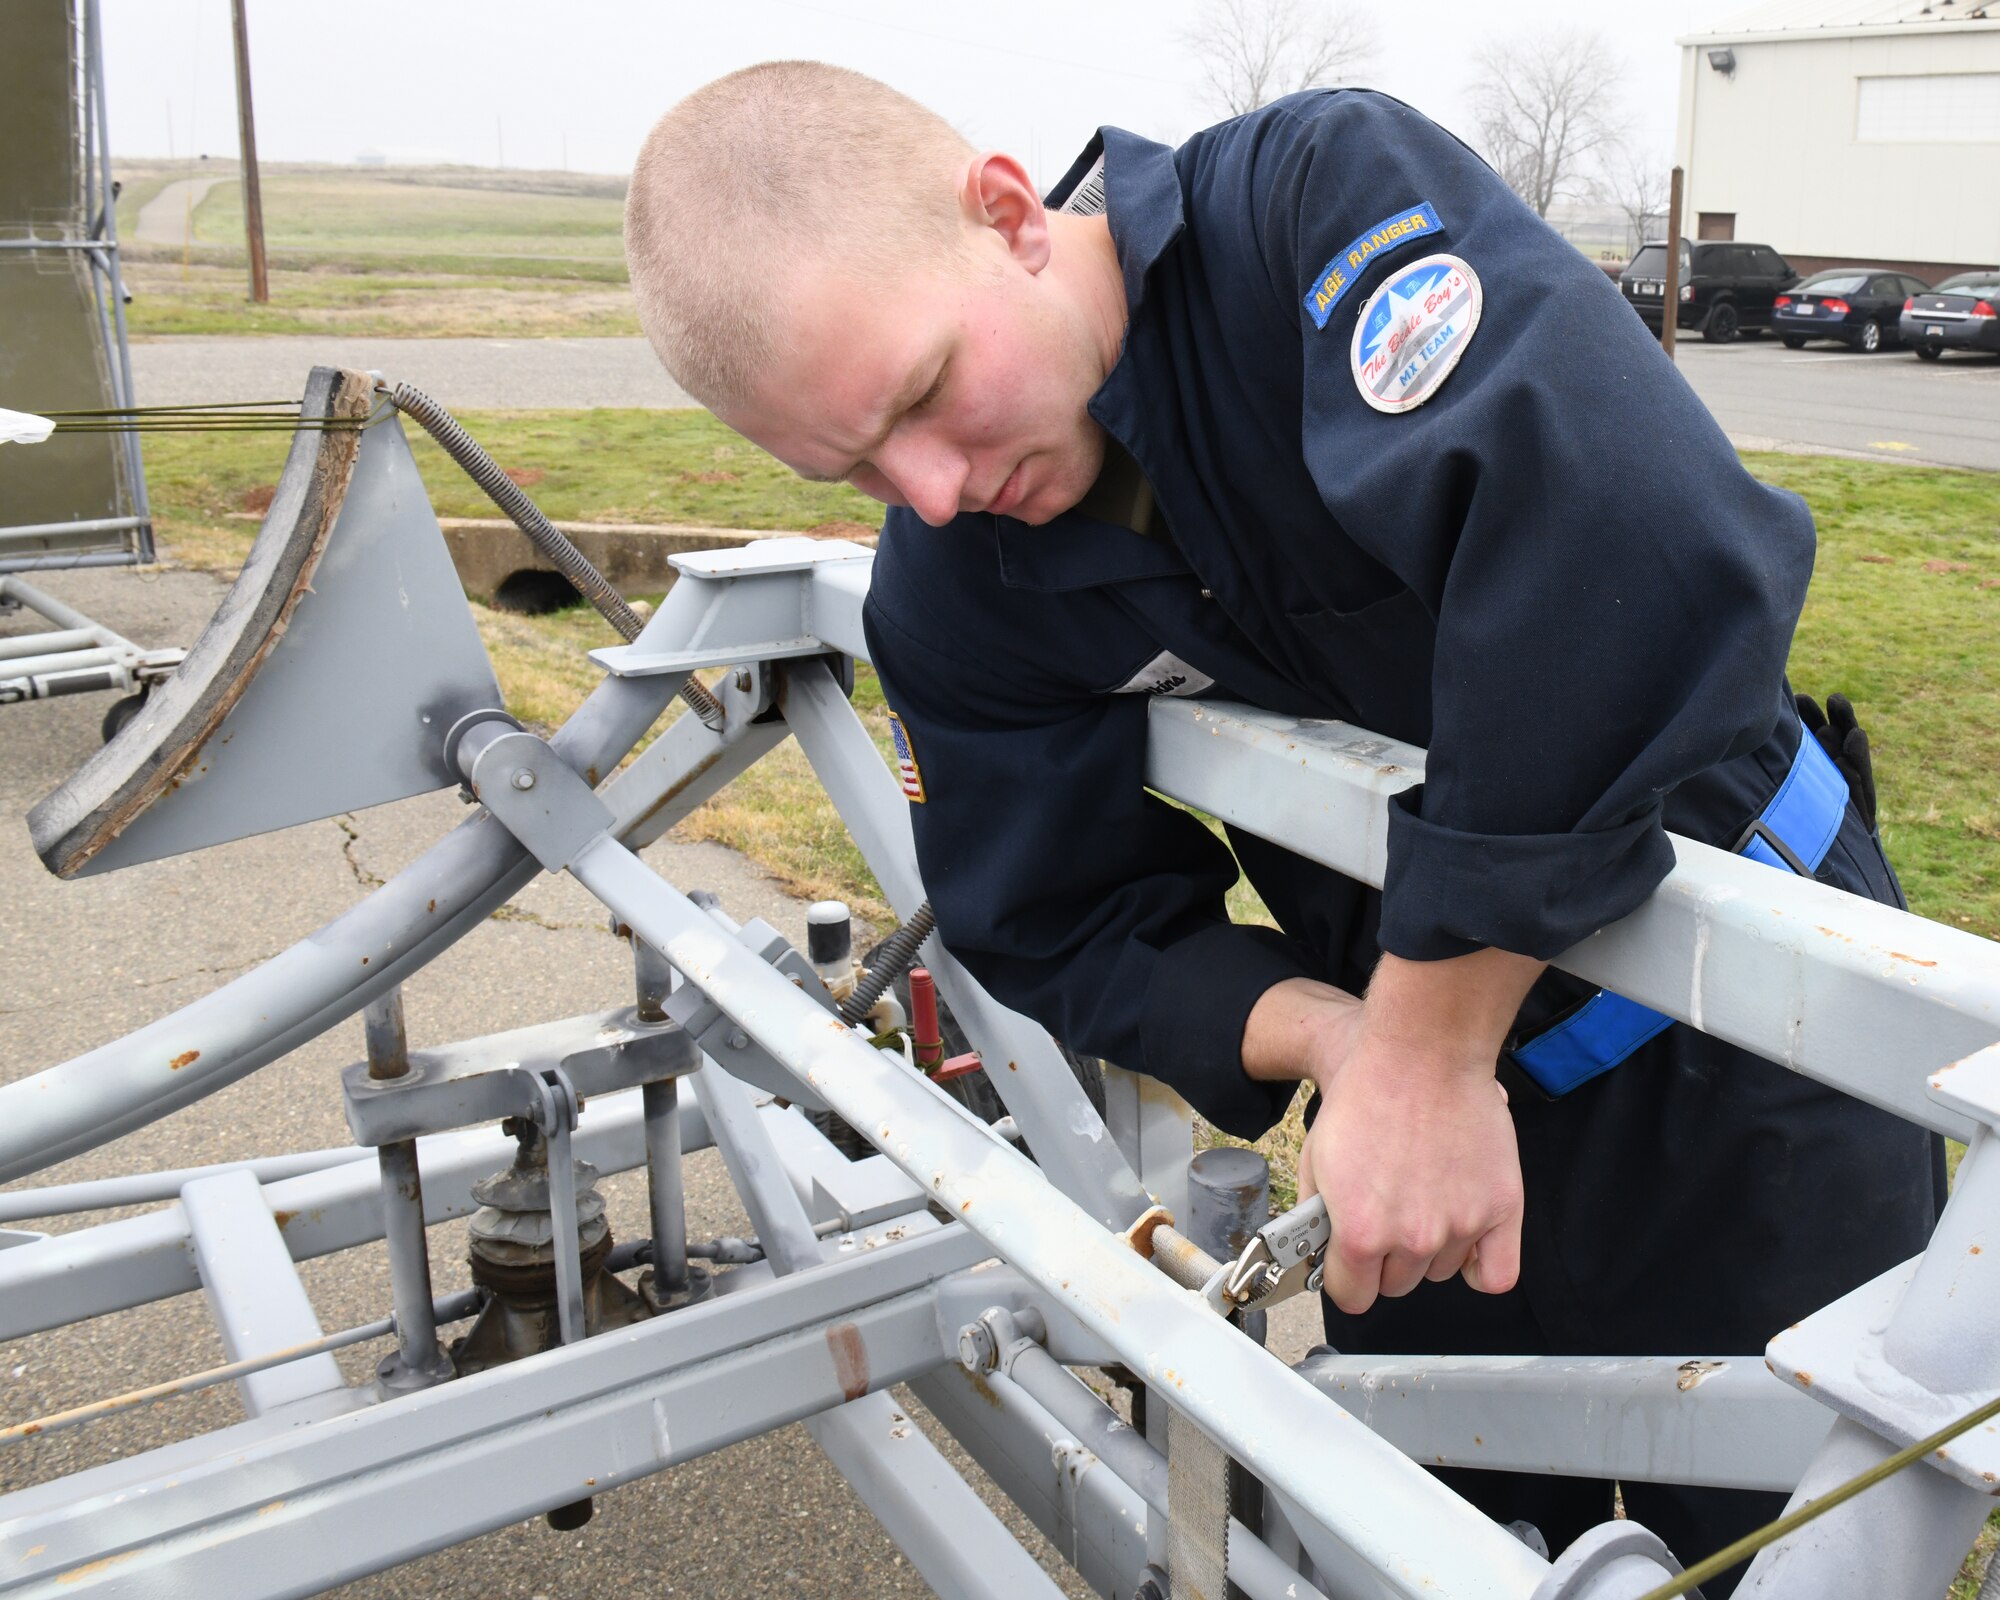 Airman 1st Class Calvin Wilkins, 9th Maintenance Squadron aerospace ground equipment journeyman, loosens a nut on an aircraft dolly to remove a strap, Jan. 7 2020 on Beale Air Force Base, California. AGE is a 24/7 operation that is divided into four sections; maintenance, inspection, service and delivery, and support. (U.S. Air Force photo by Airman 1st Class Luis A. Ruiz-Vazquez)